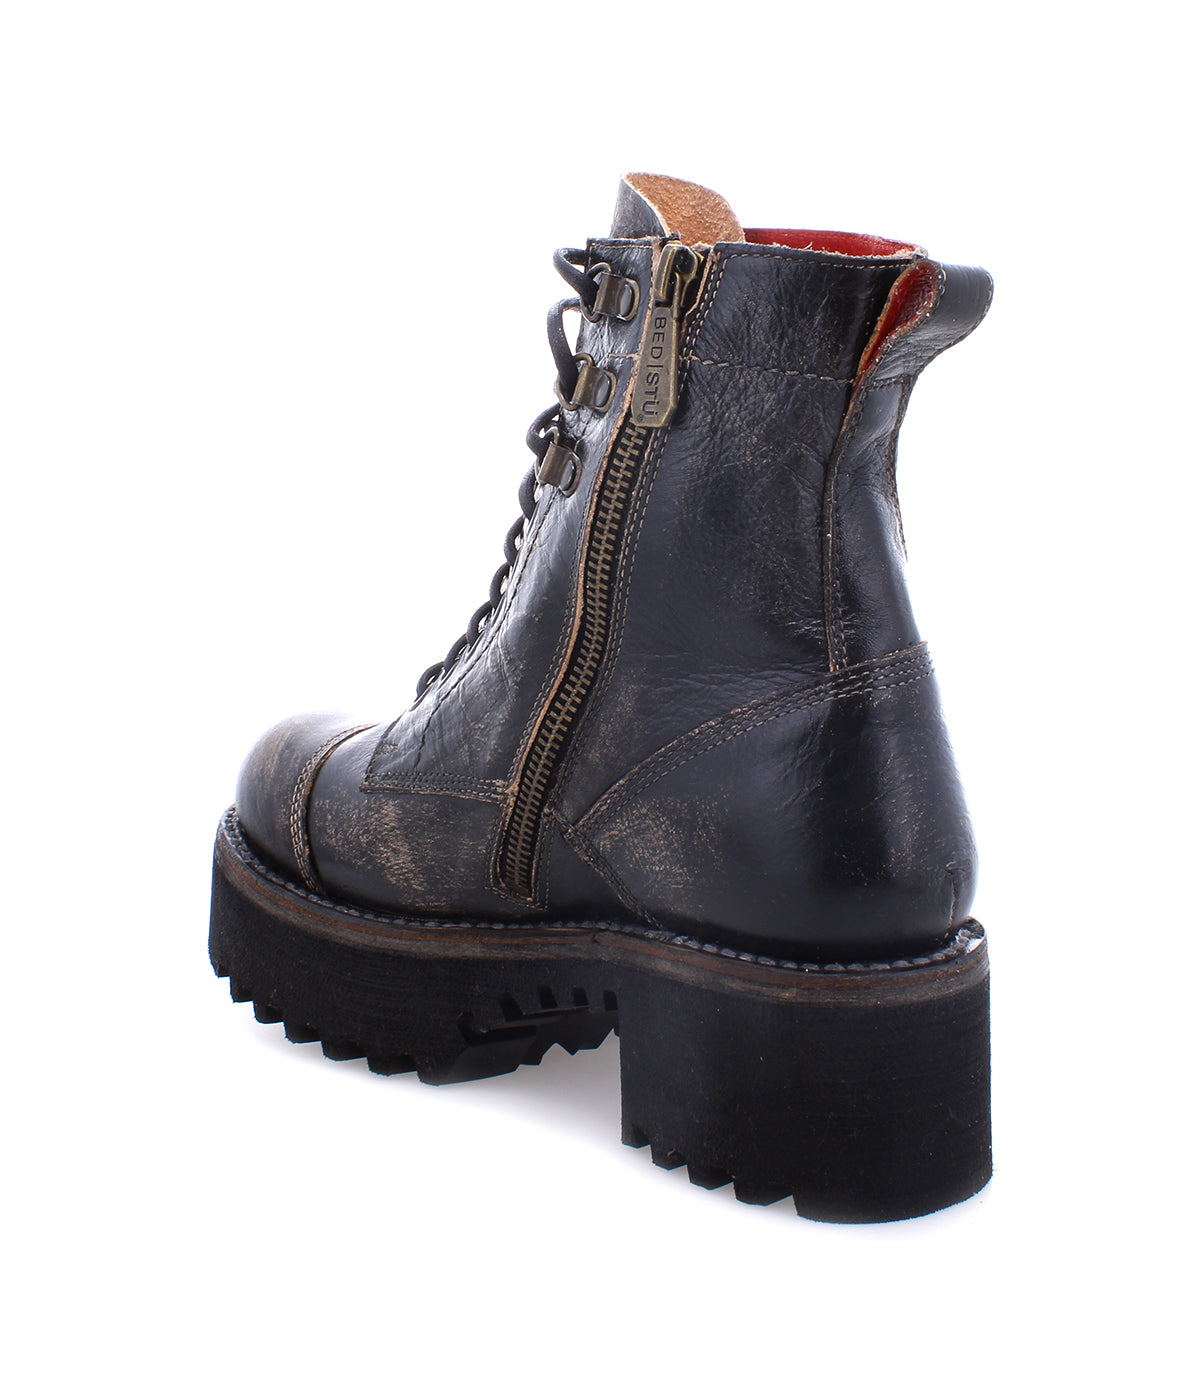 A lace-up, black leather combat boot with a zipper on the side from Bed Stu called Prudence Hi.